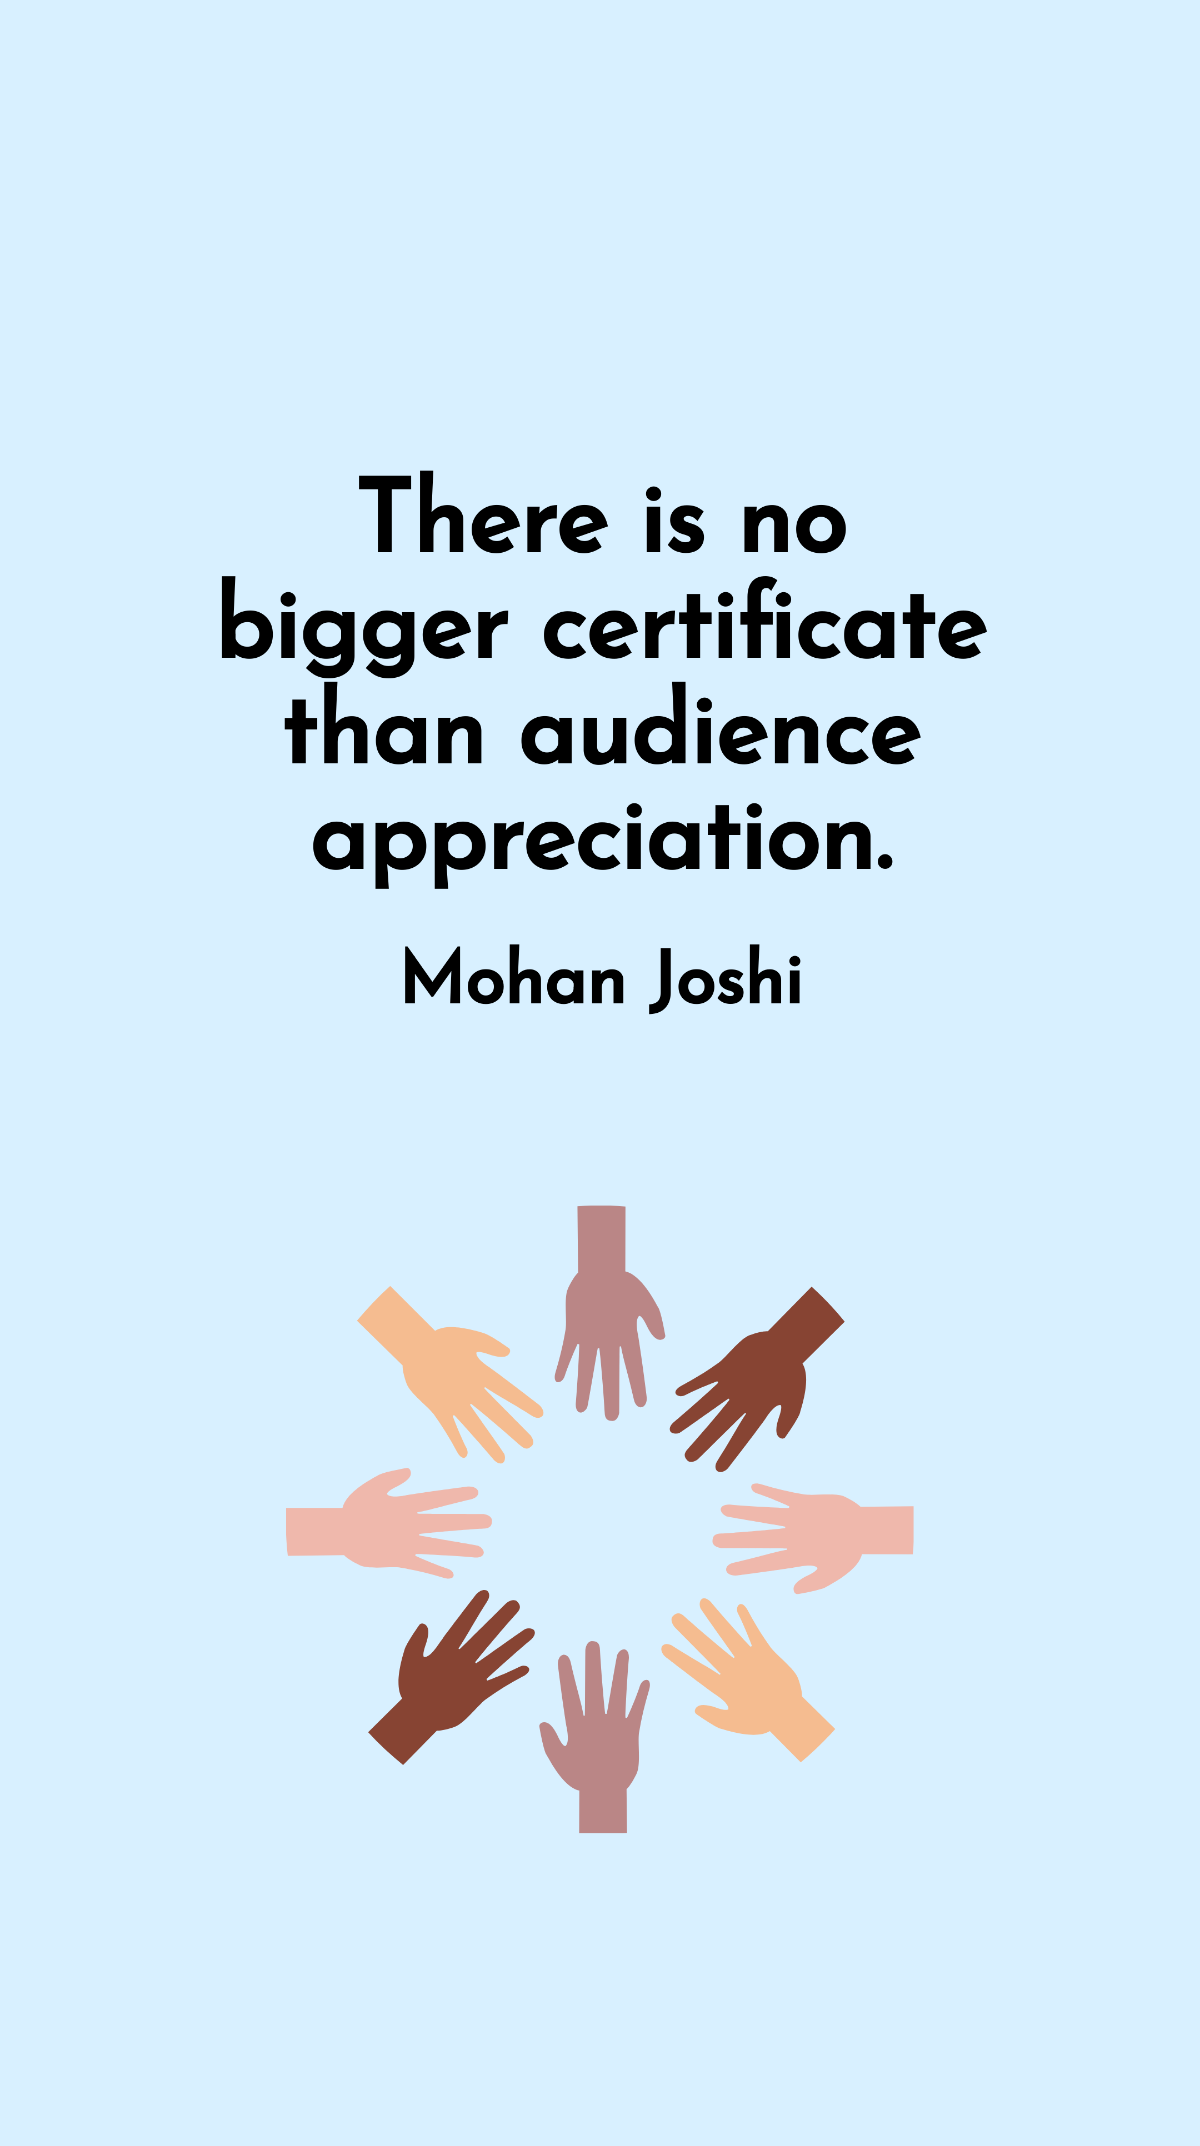 Mohan Joshi - There is no bigger certificate than audience appreciation. Template